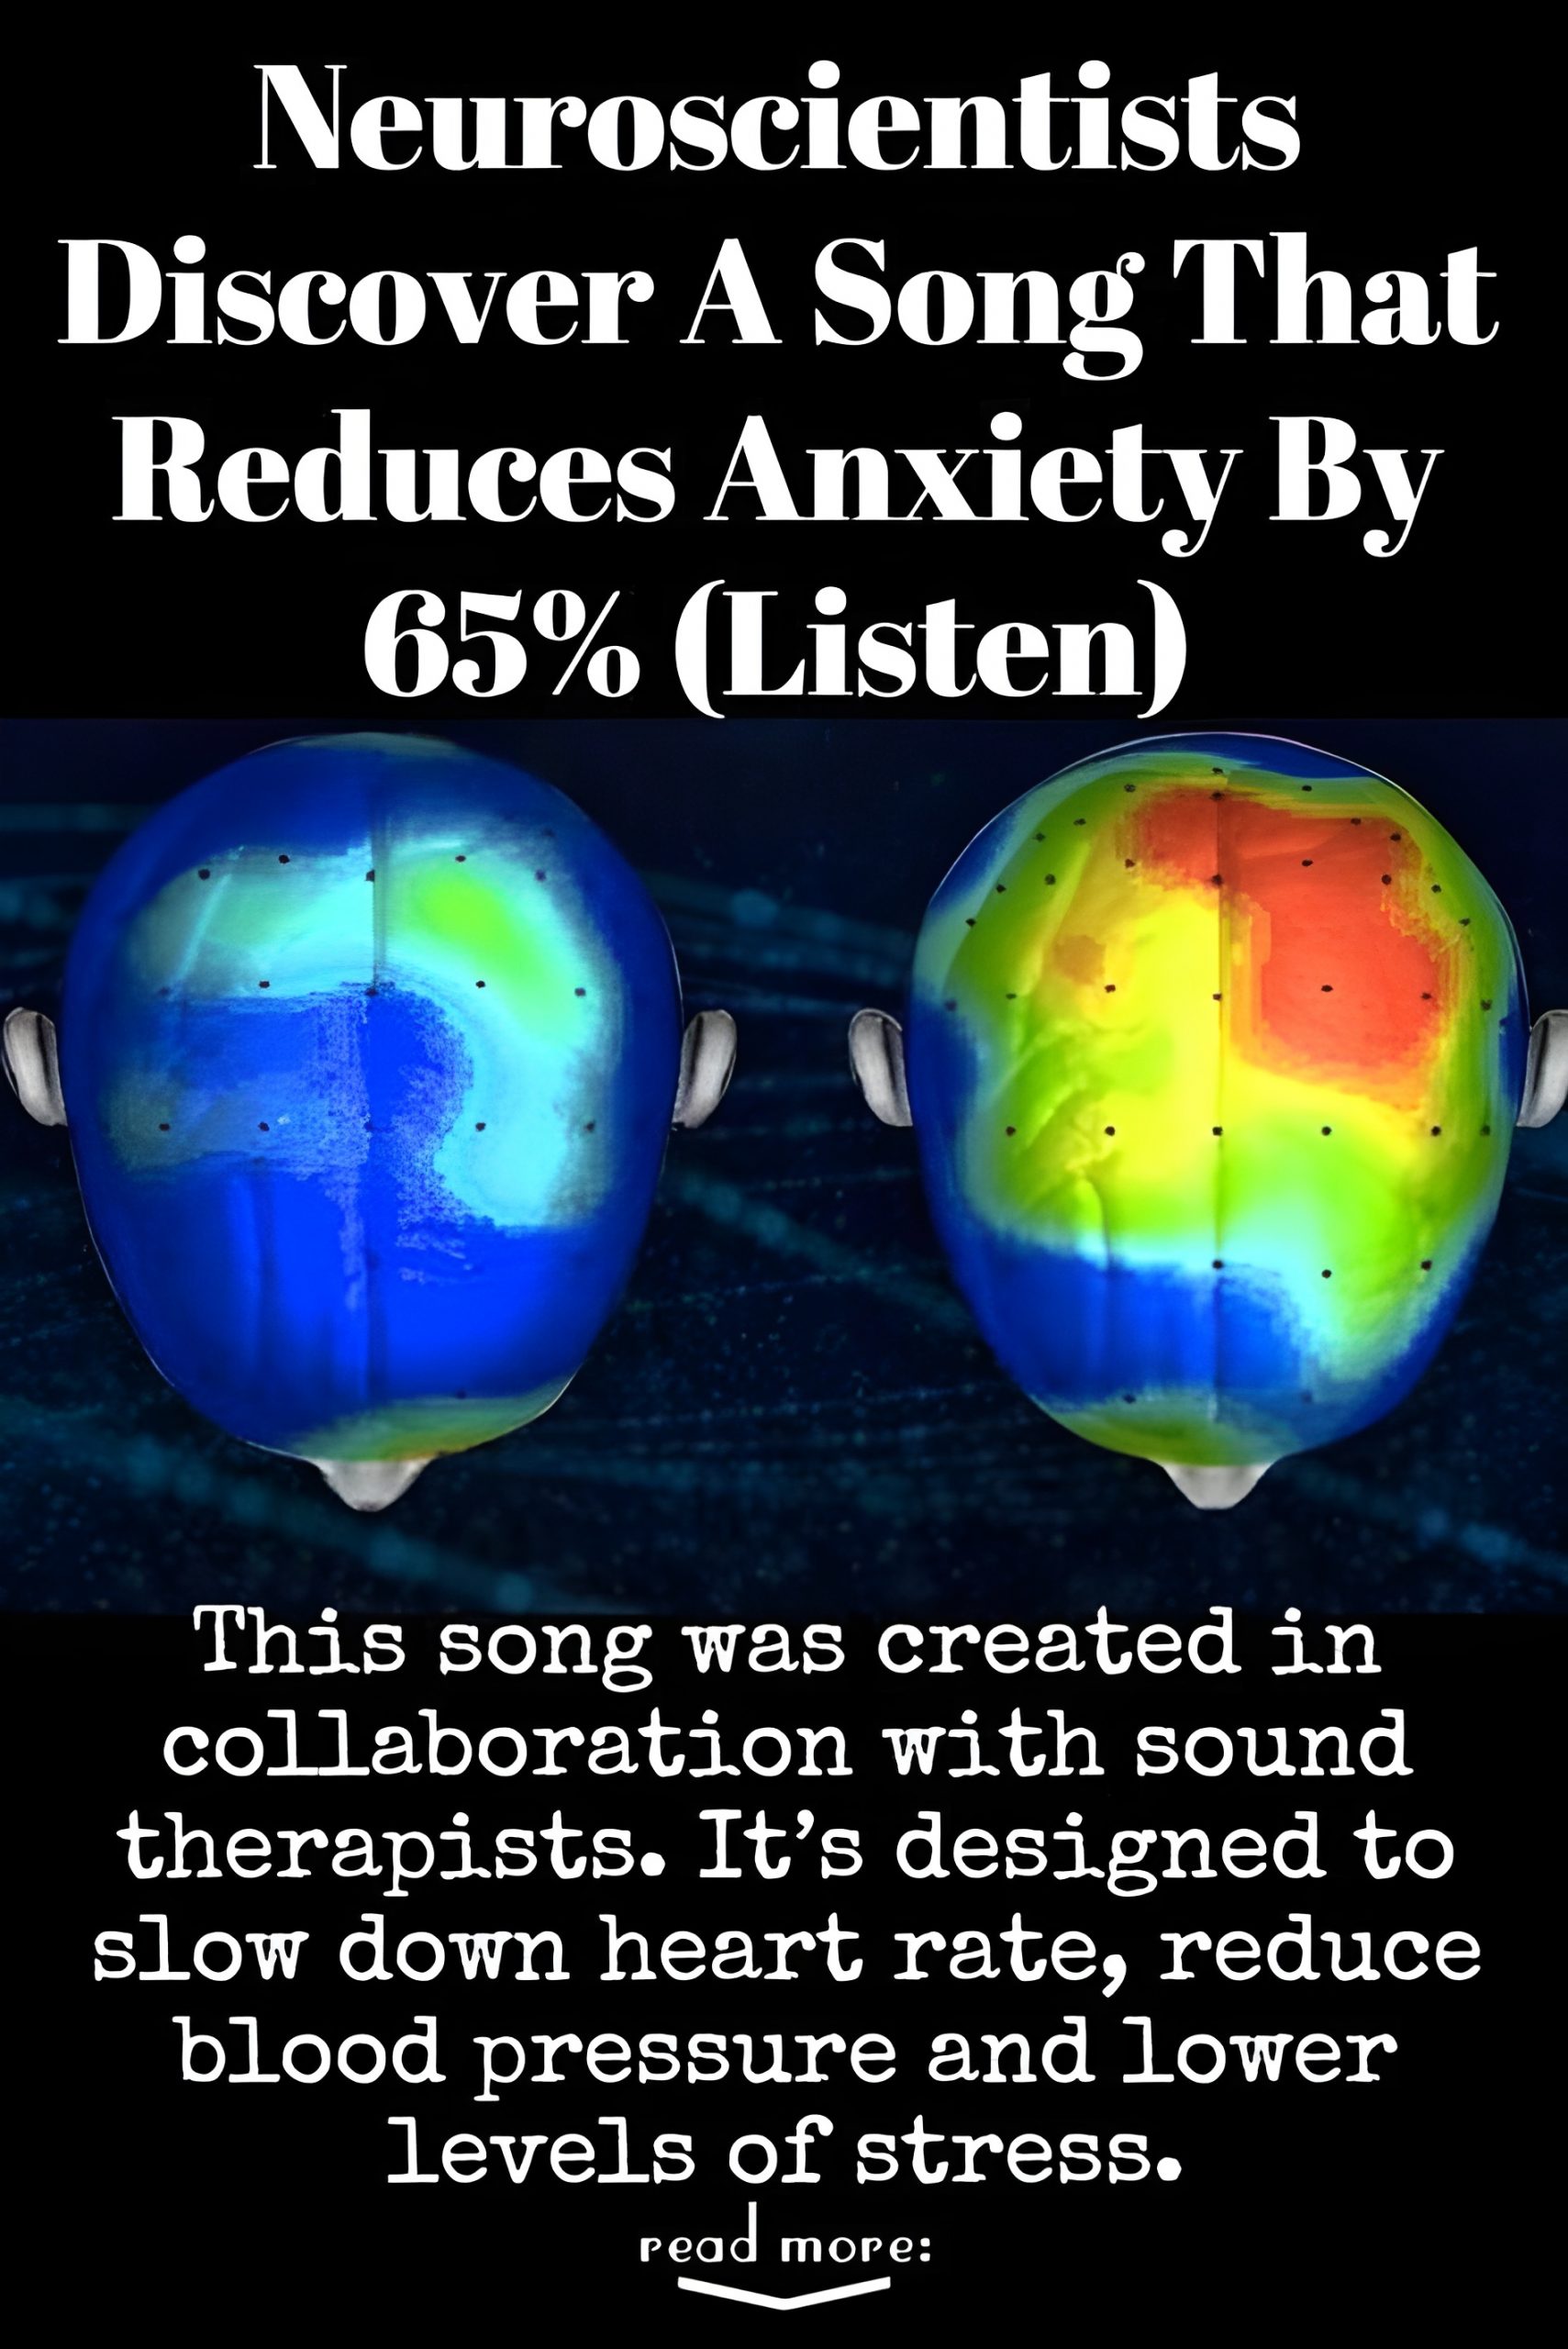 Neuroscientists Discover Music To Calm Anxiety By 65% (Listen)